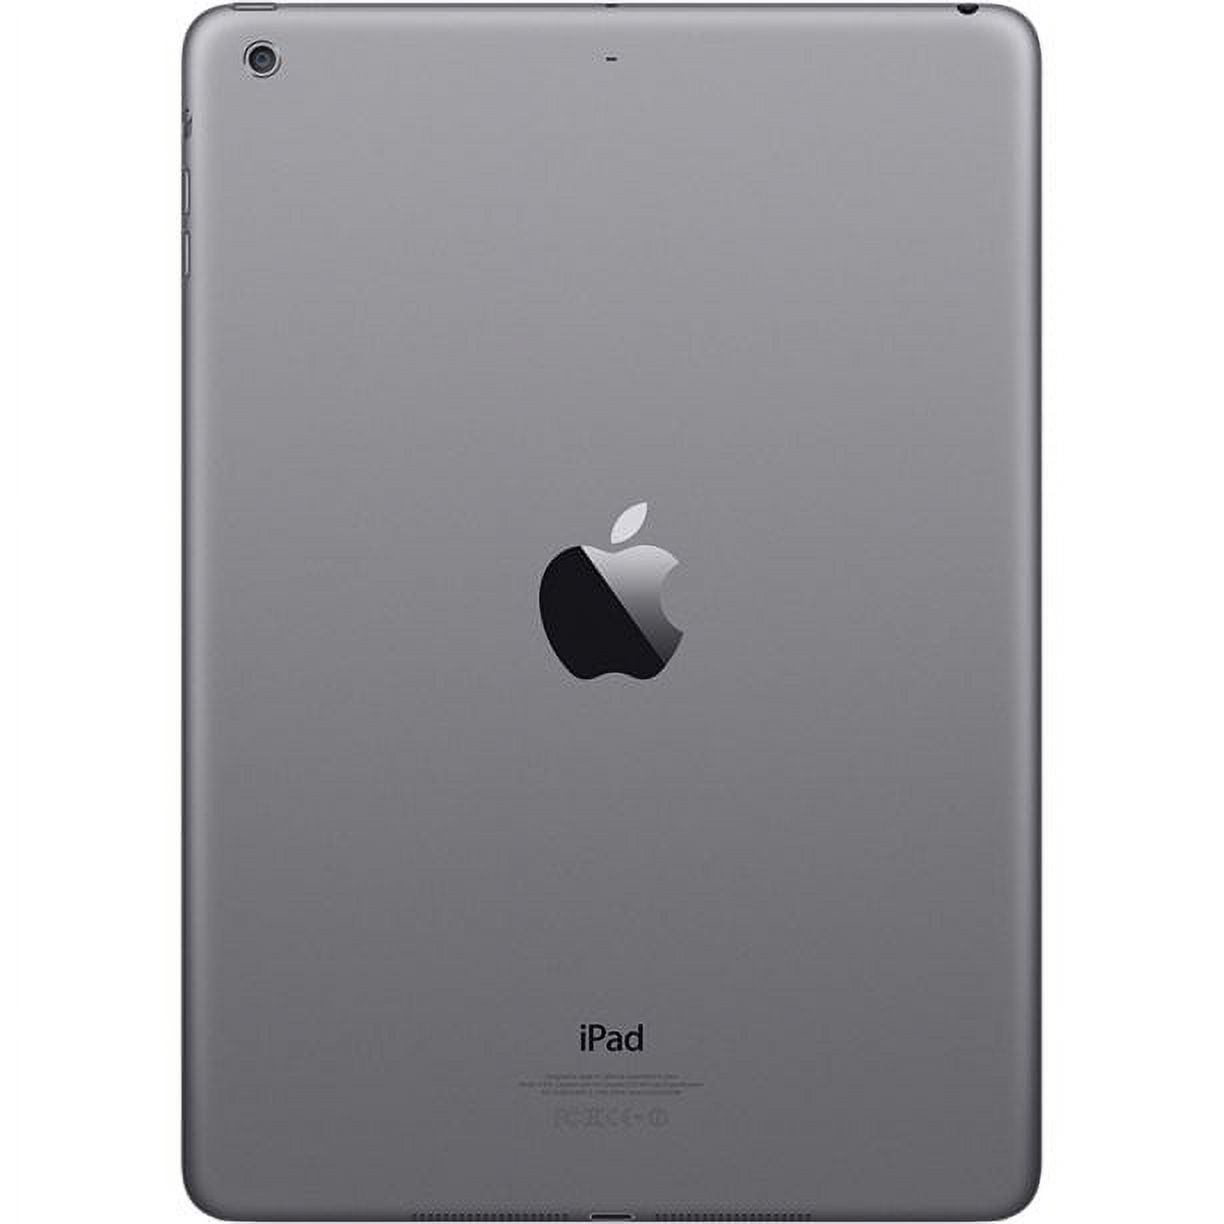 Apple iPad Air ME993LL/A Tablet, 9.7" QXGA, Apple A7, 16 GB Storage, iOS 7, Space Gray - image 2 of 5